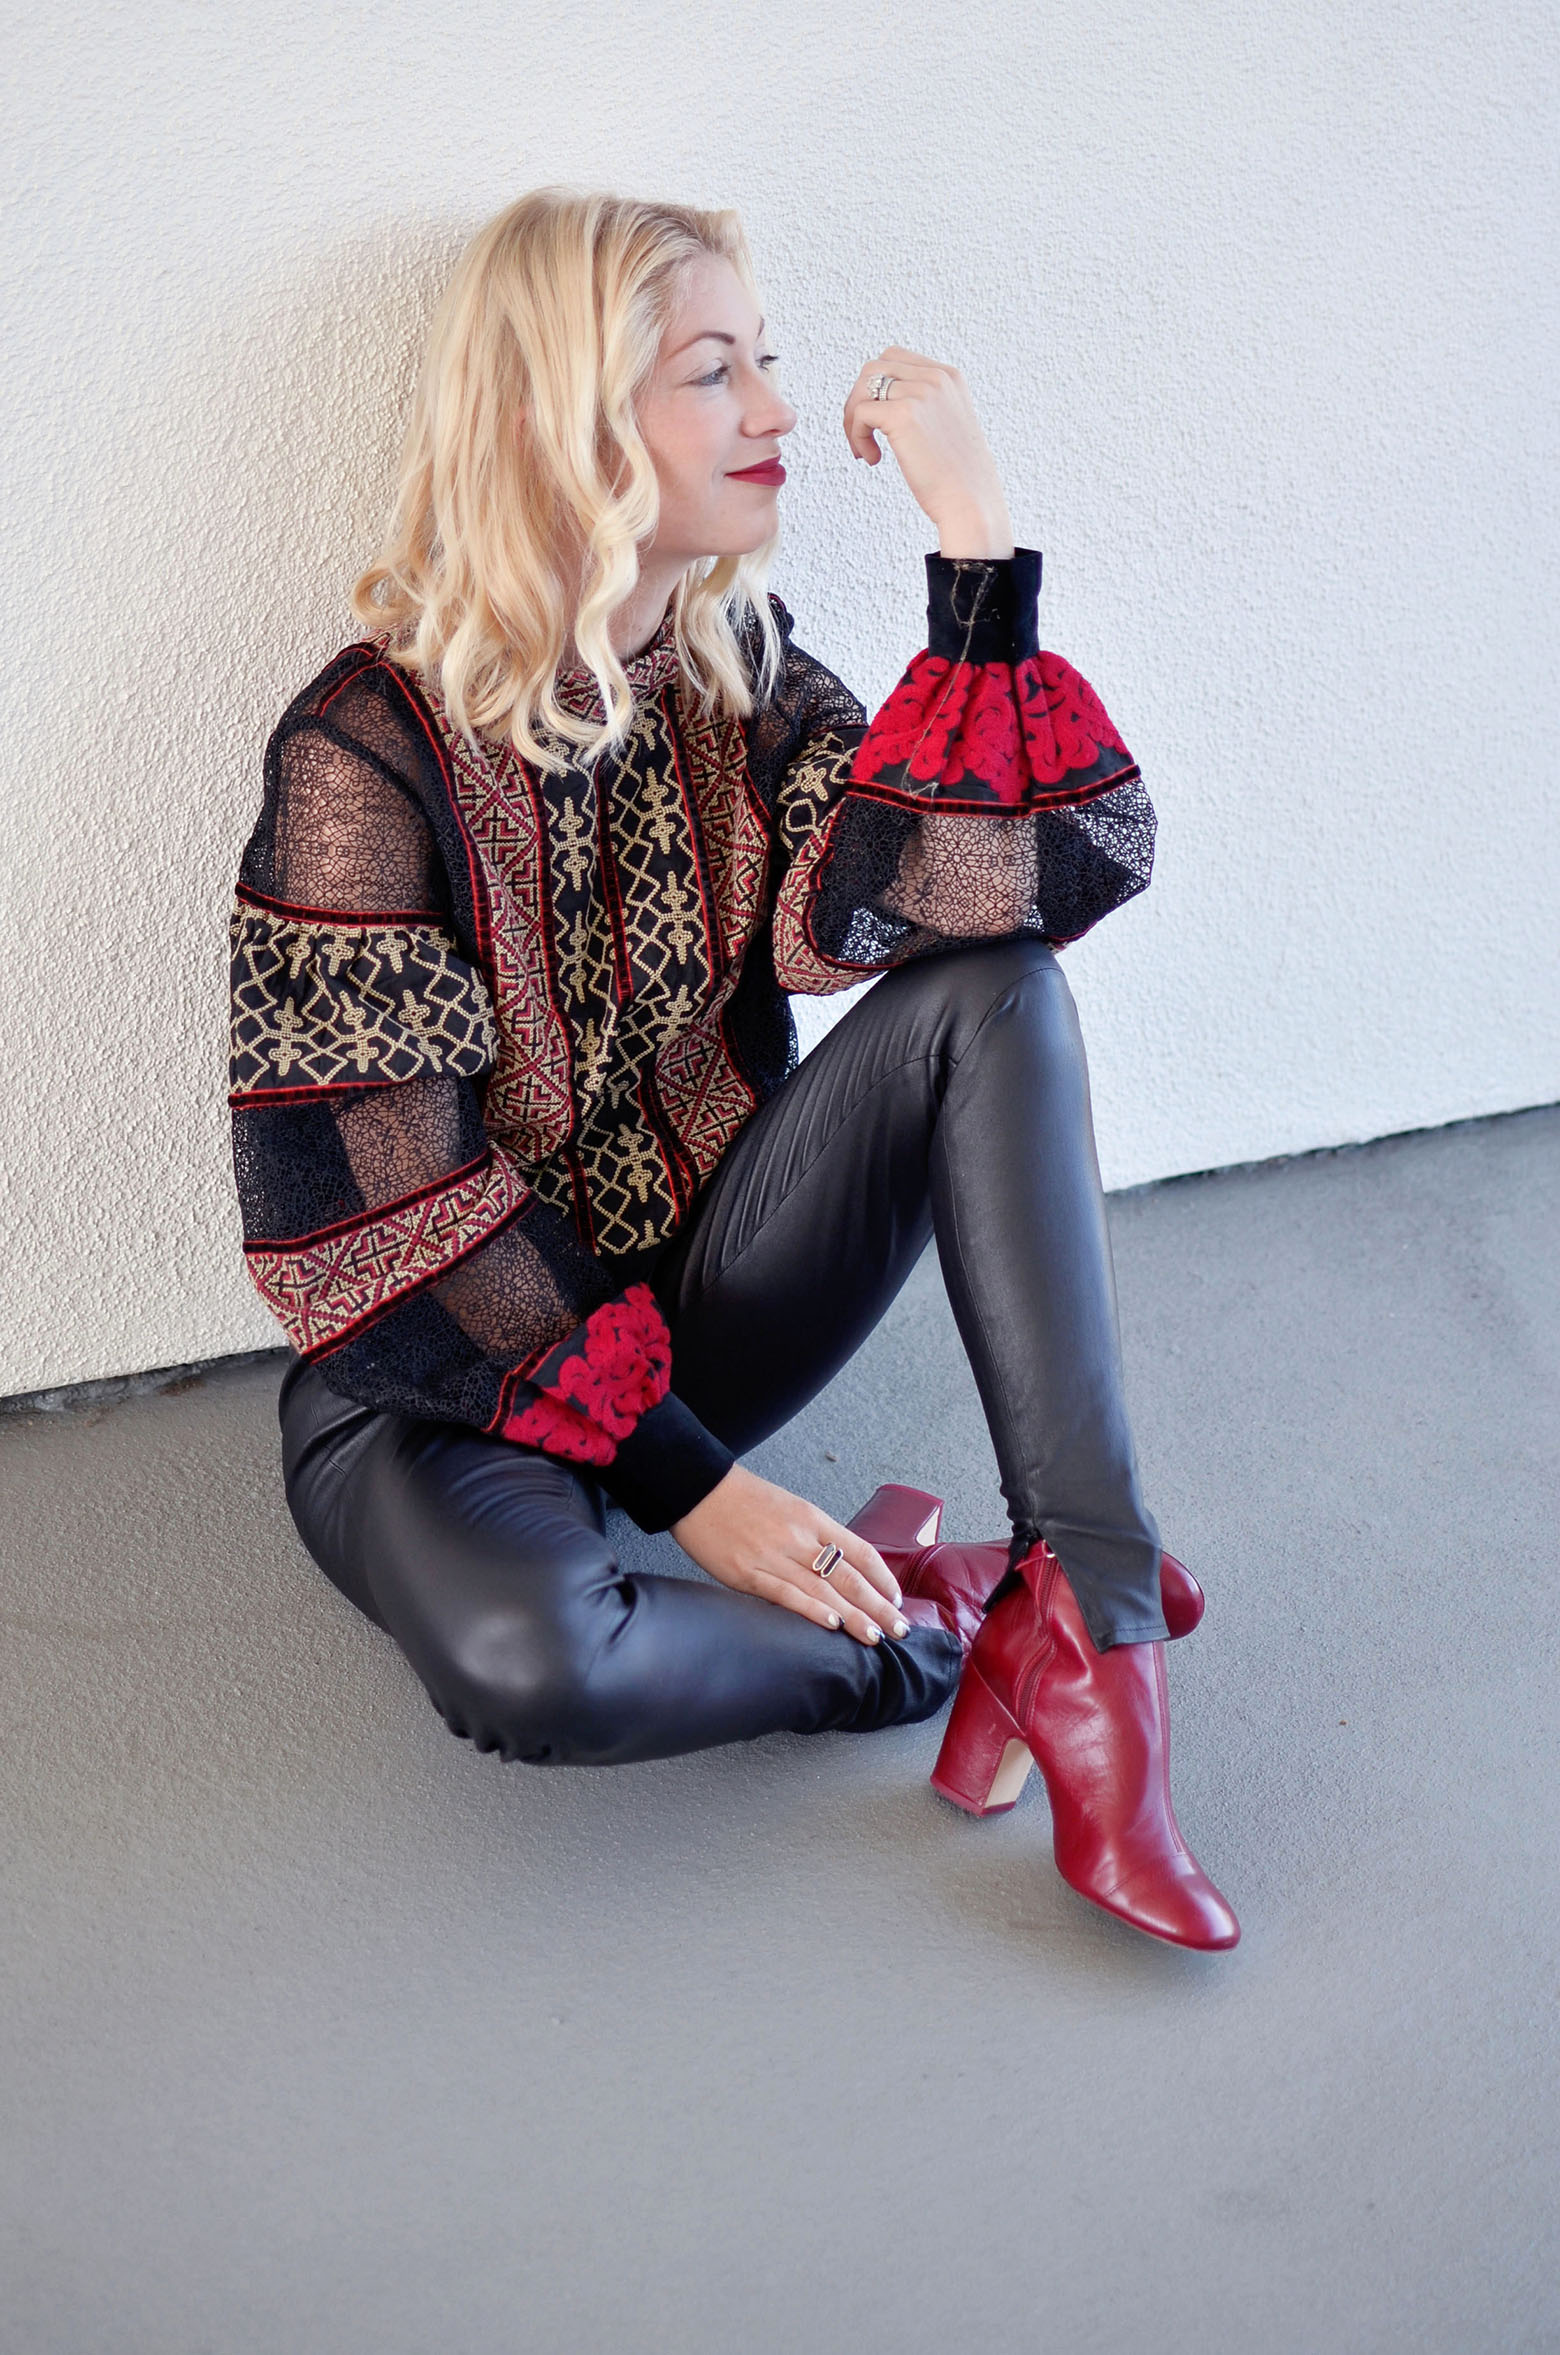 Stefanie from the style safari wears H&M Studio red black lace mesh insert top, Iris and Ink leather leggings // thestylesafari.com